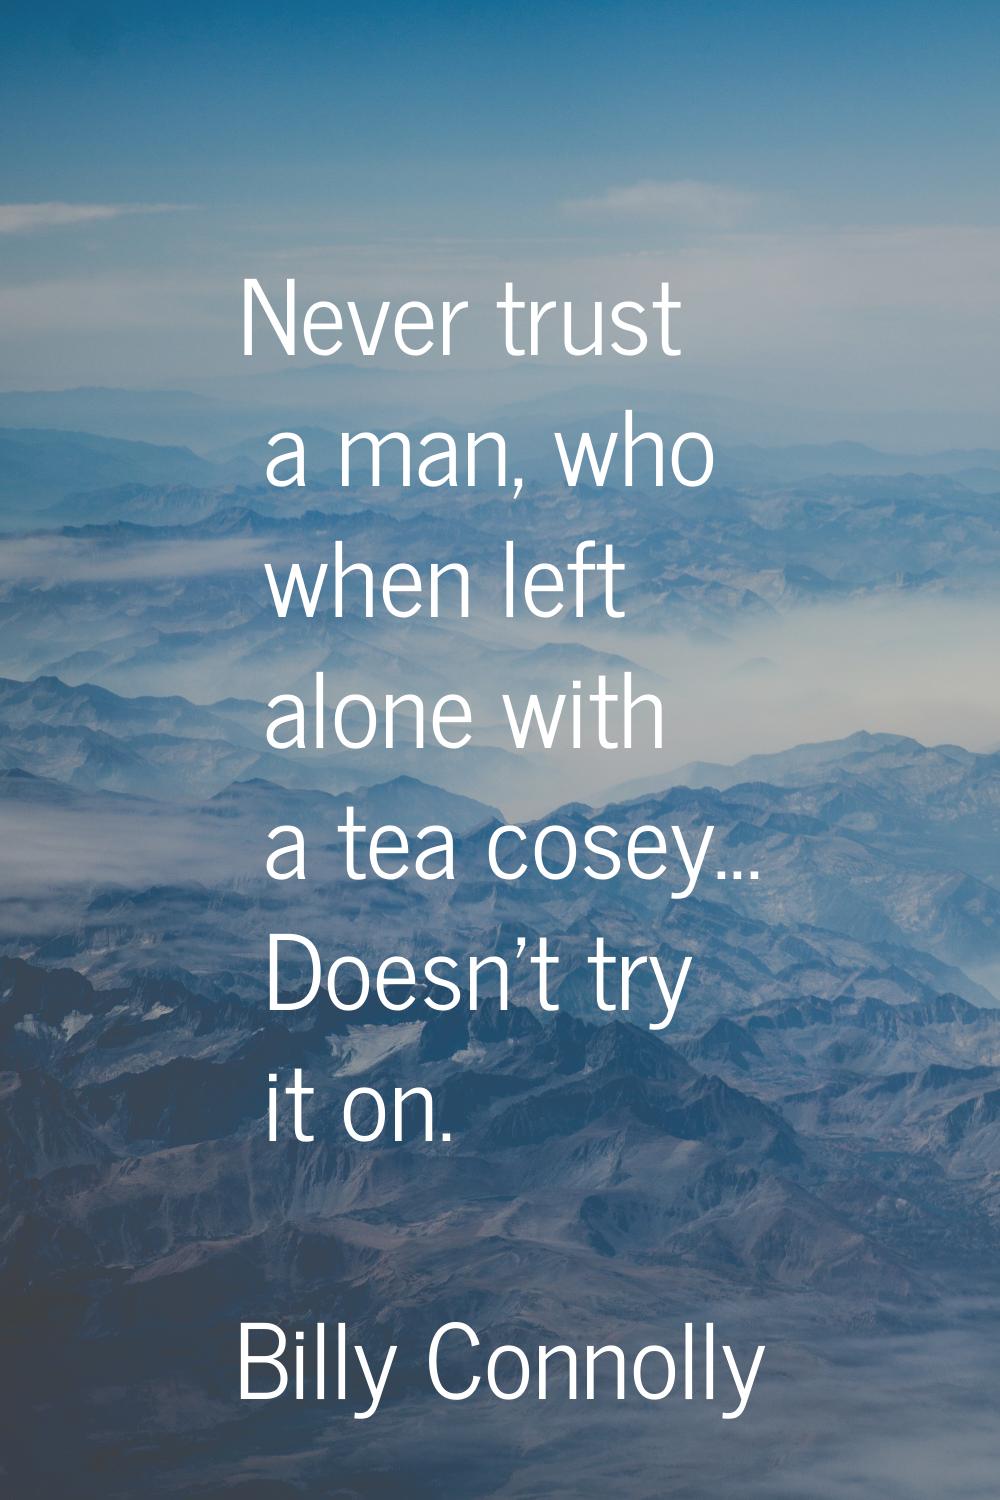 Never trust a man, who when left alone with a tea cosey... Doesn't try it on.